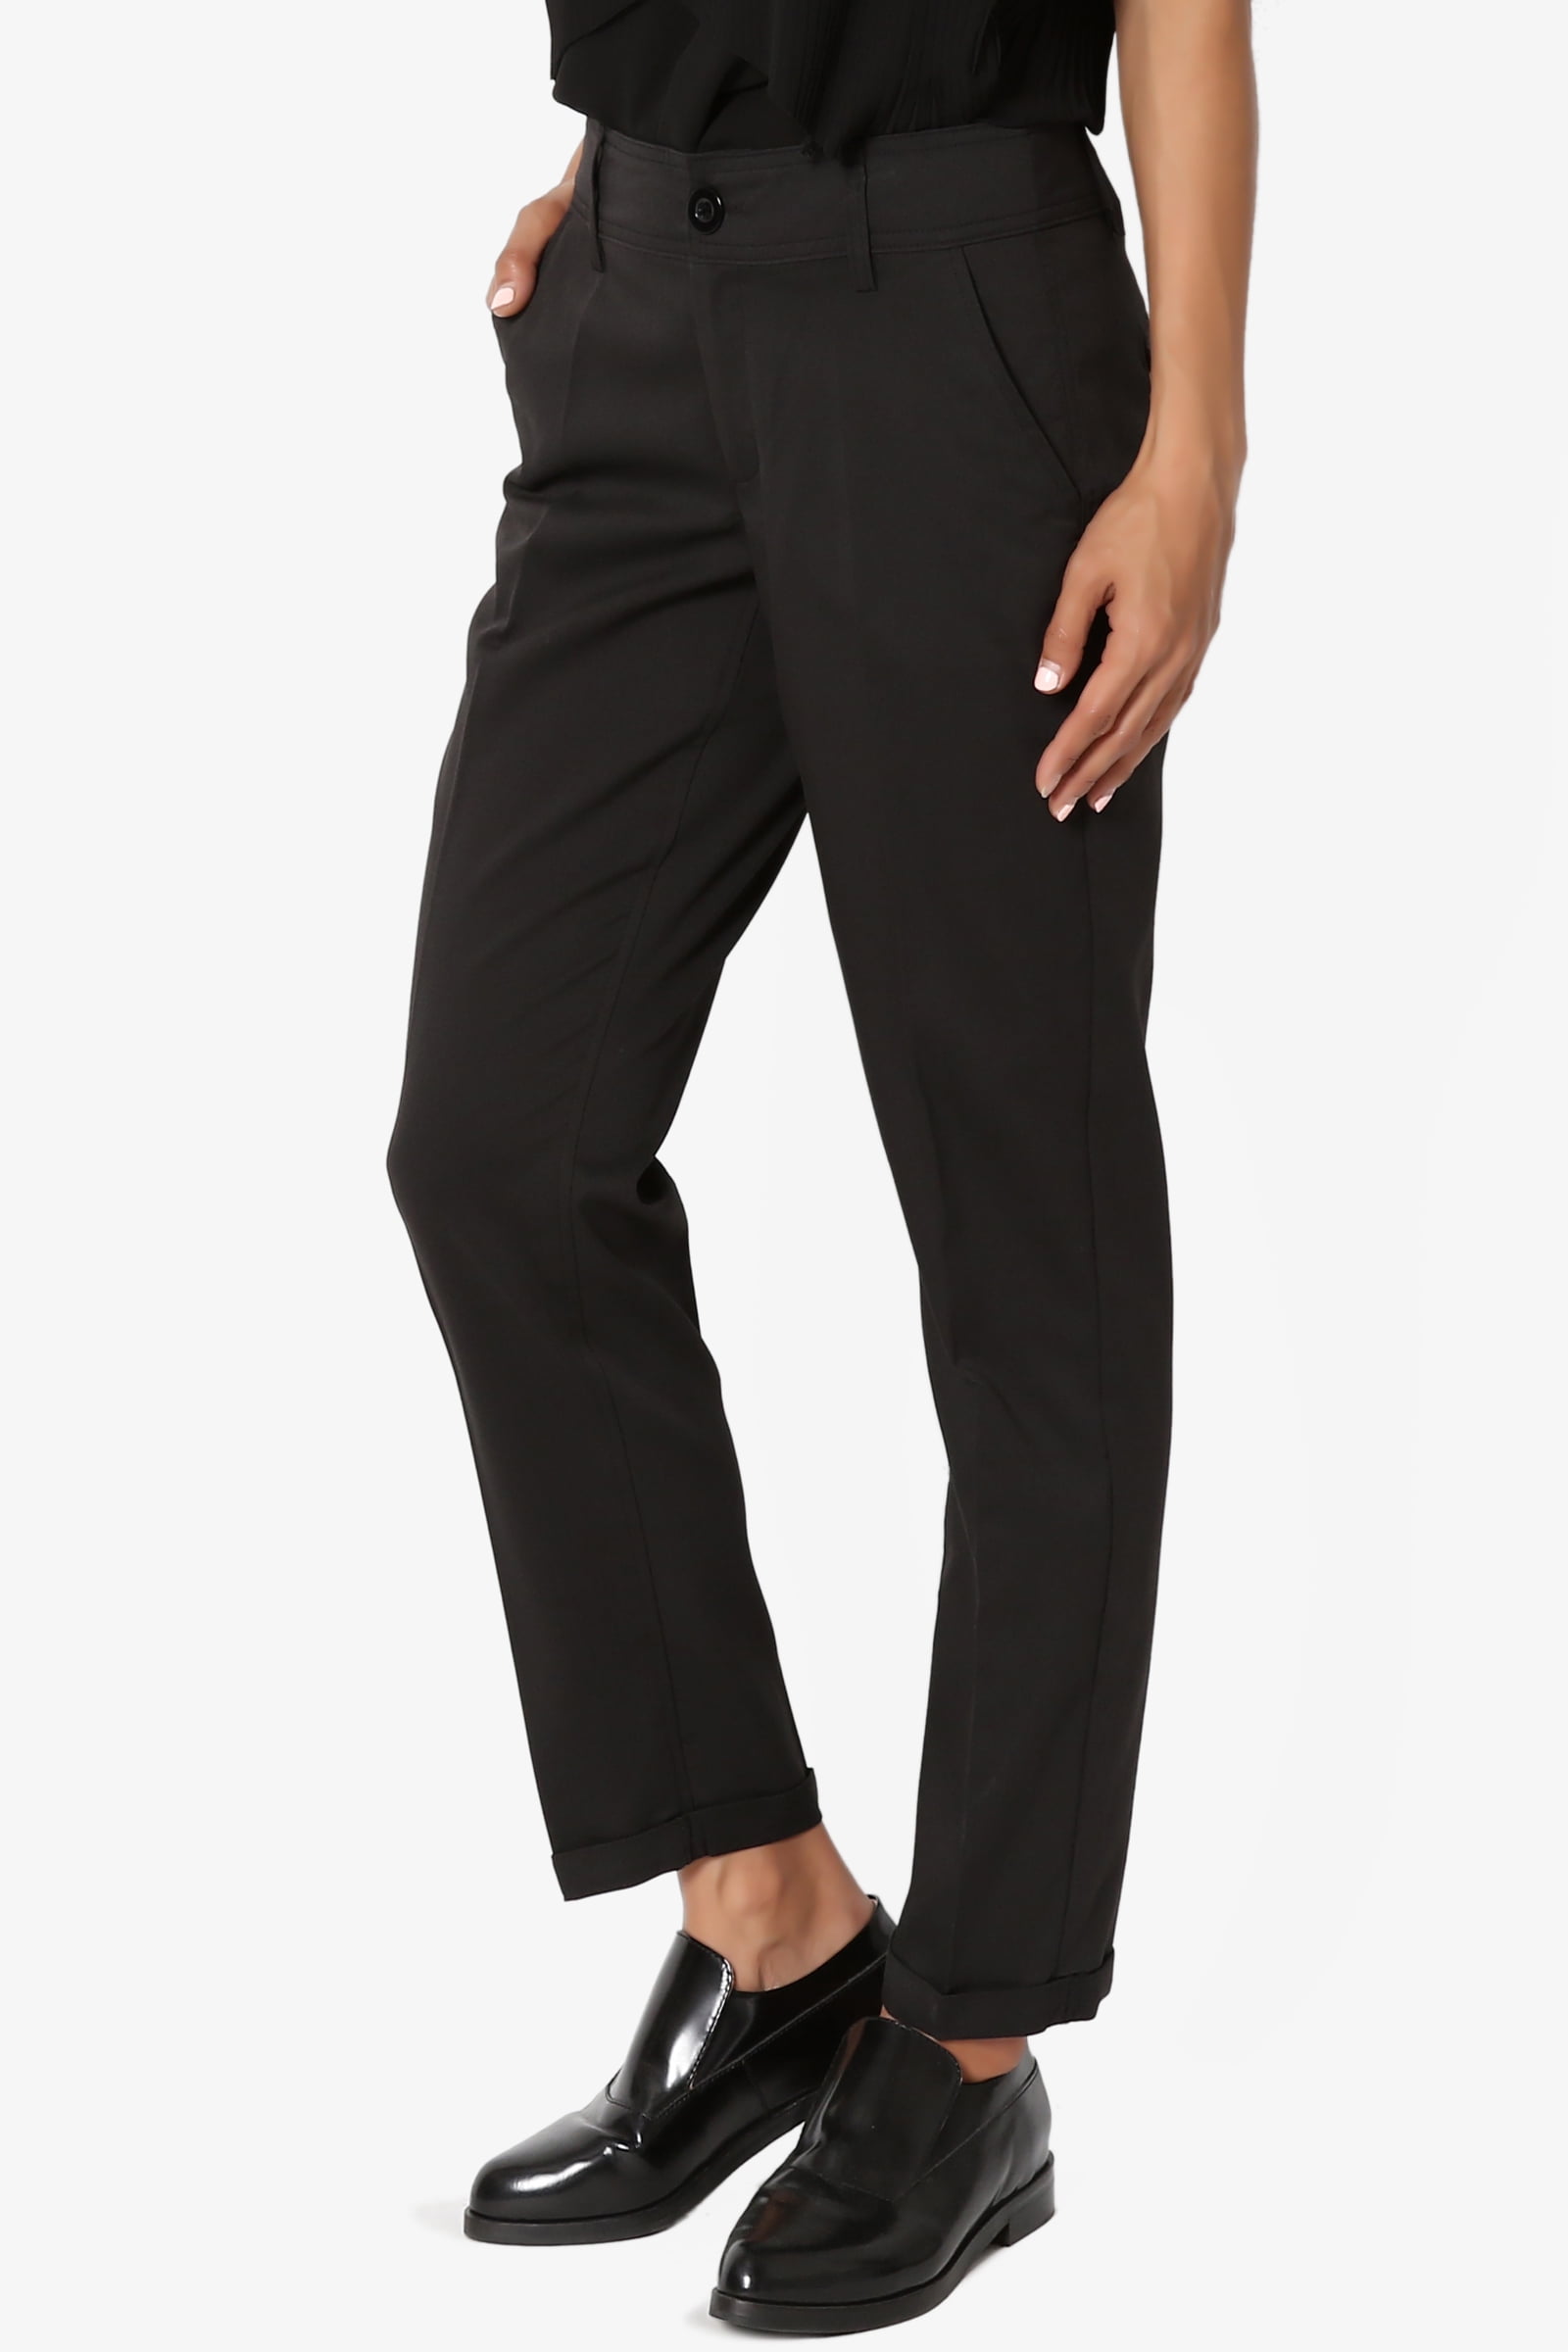 TheMogan Timelss Dressed Up Straight Leg Cuffed Crop Trouser Office Suit Pants 